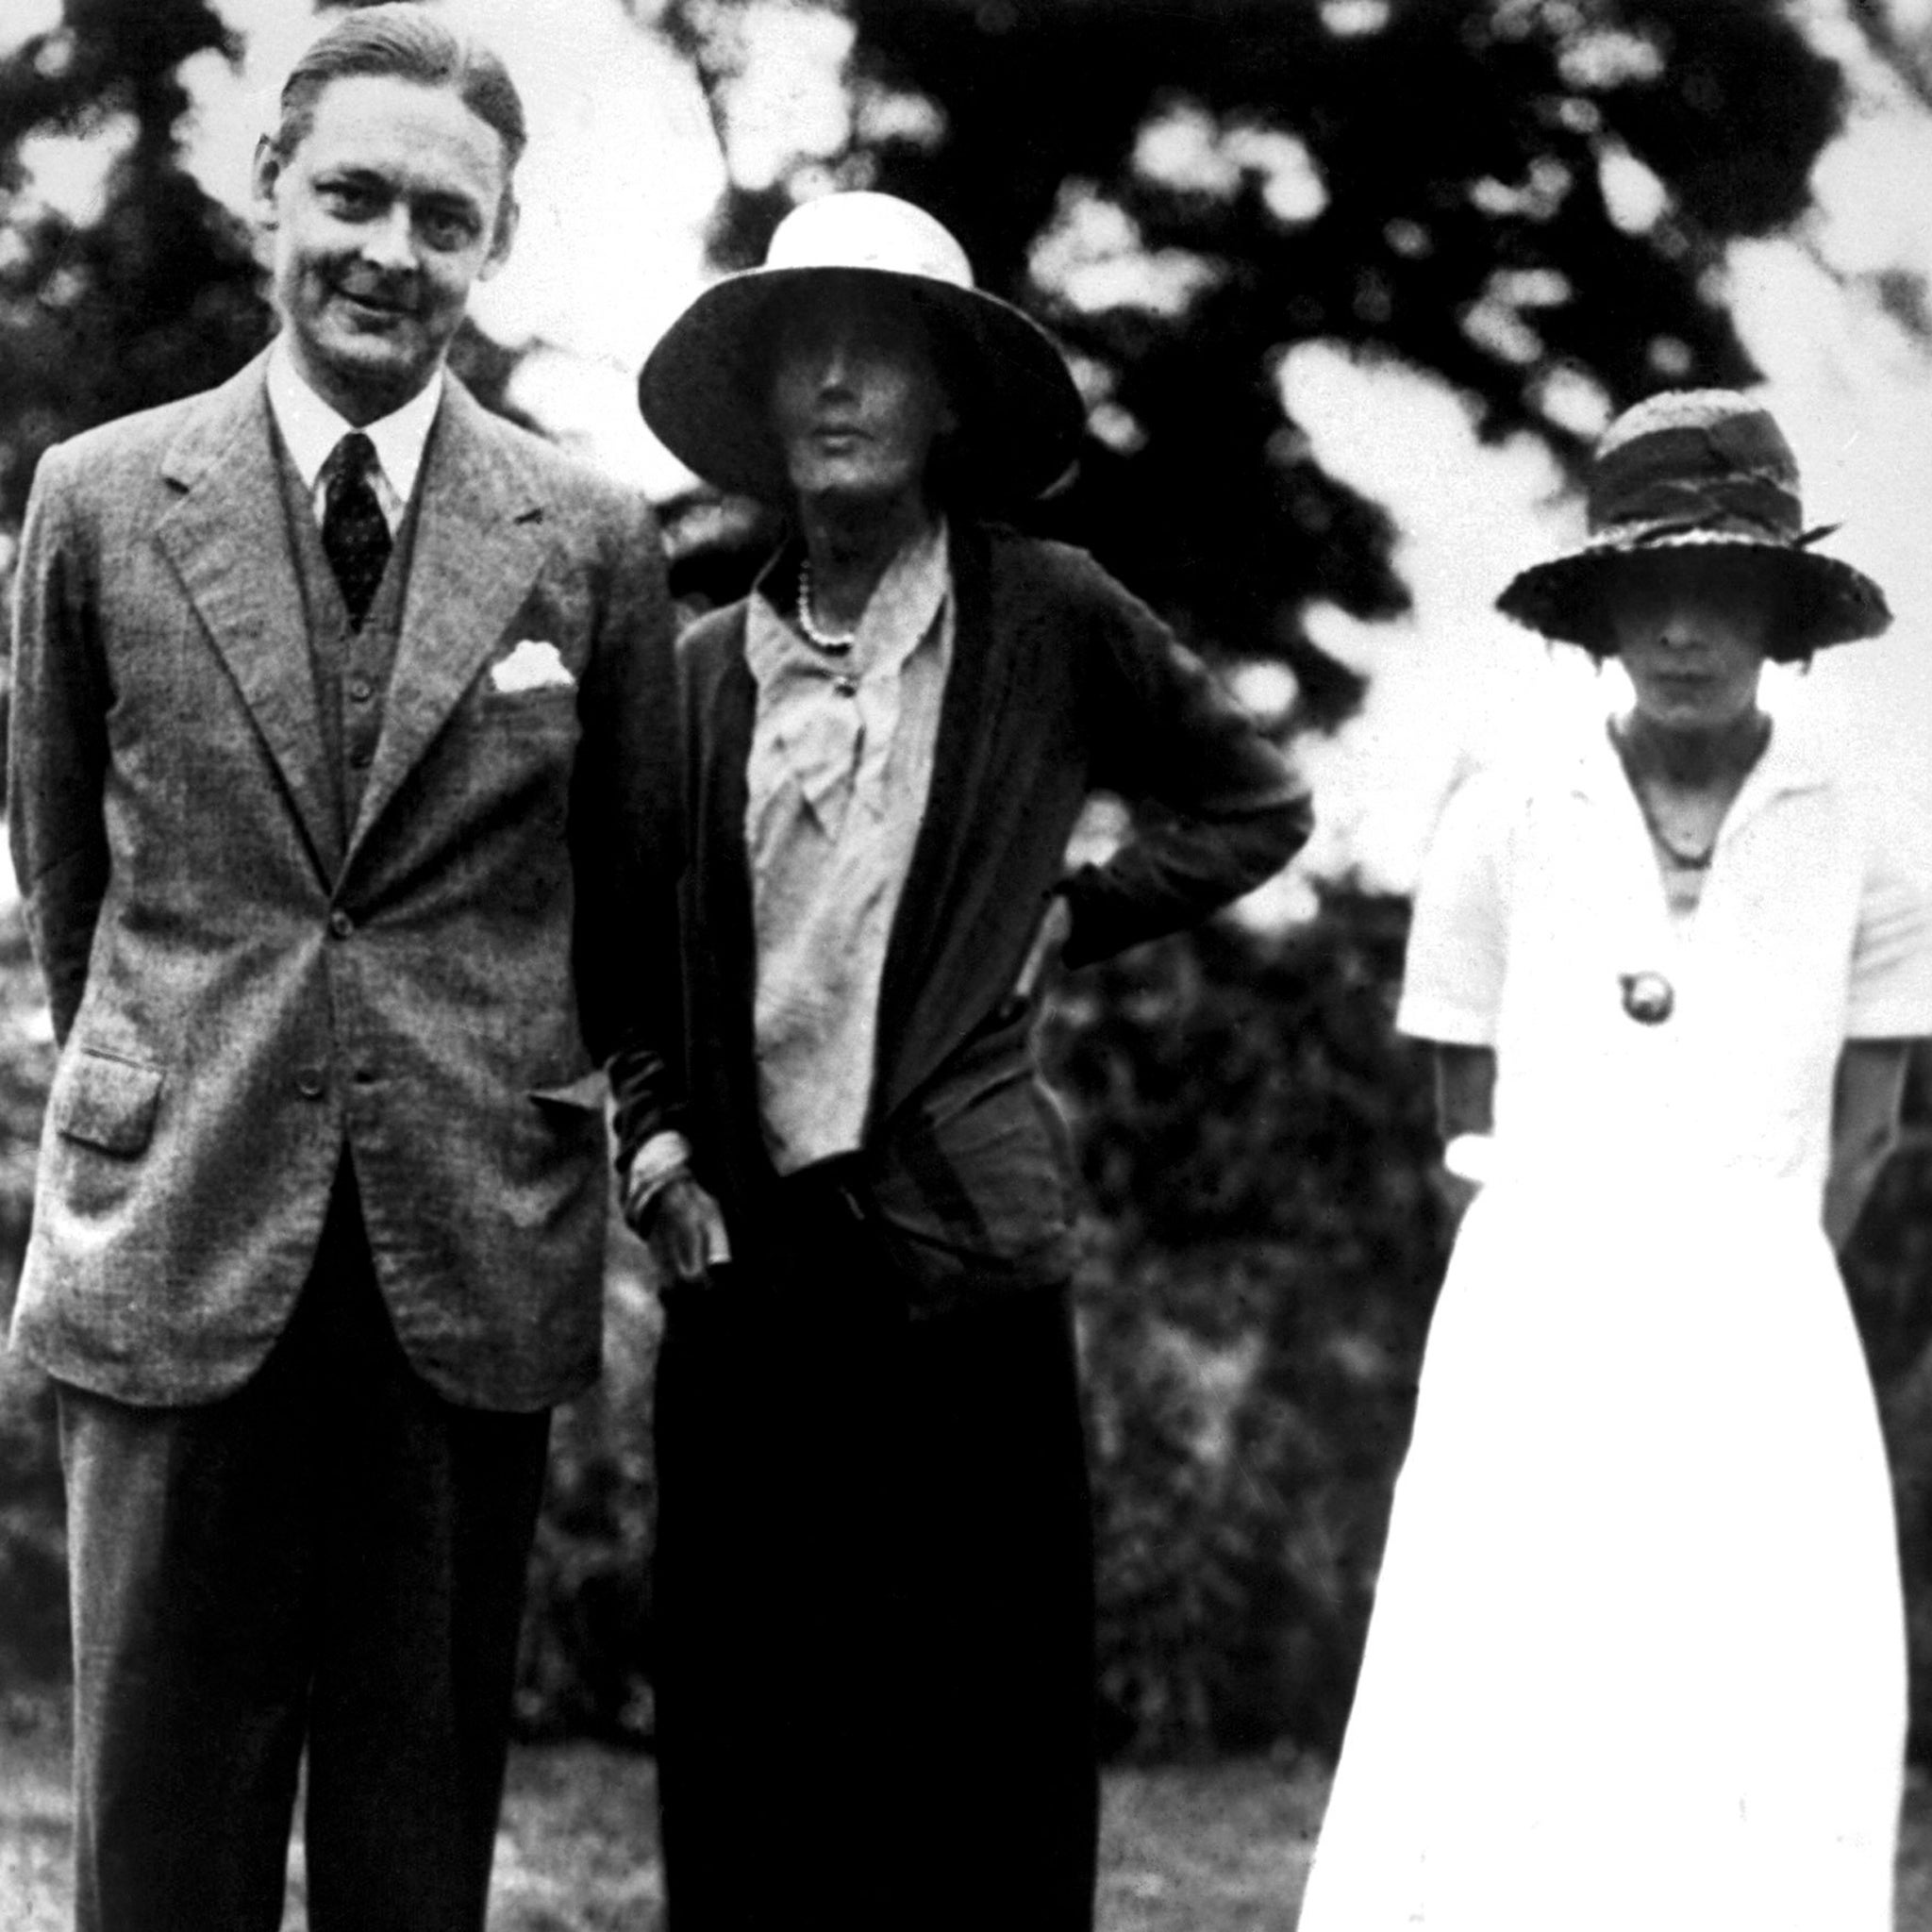 T S Eliot with Virginia Woolf and Vivienne Eliot